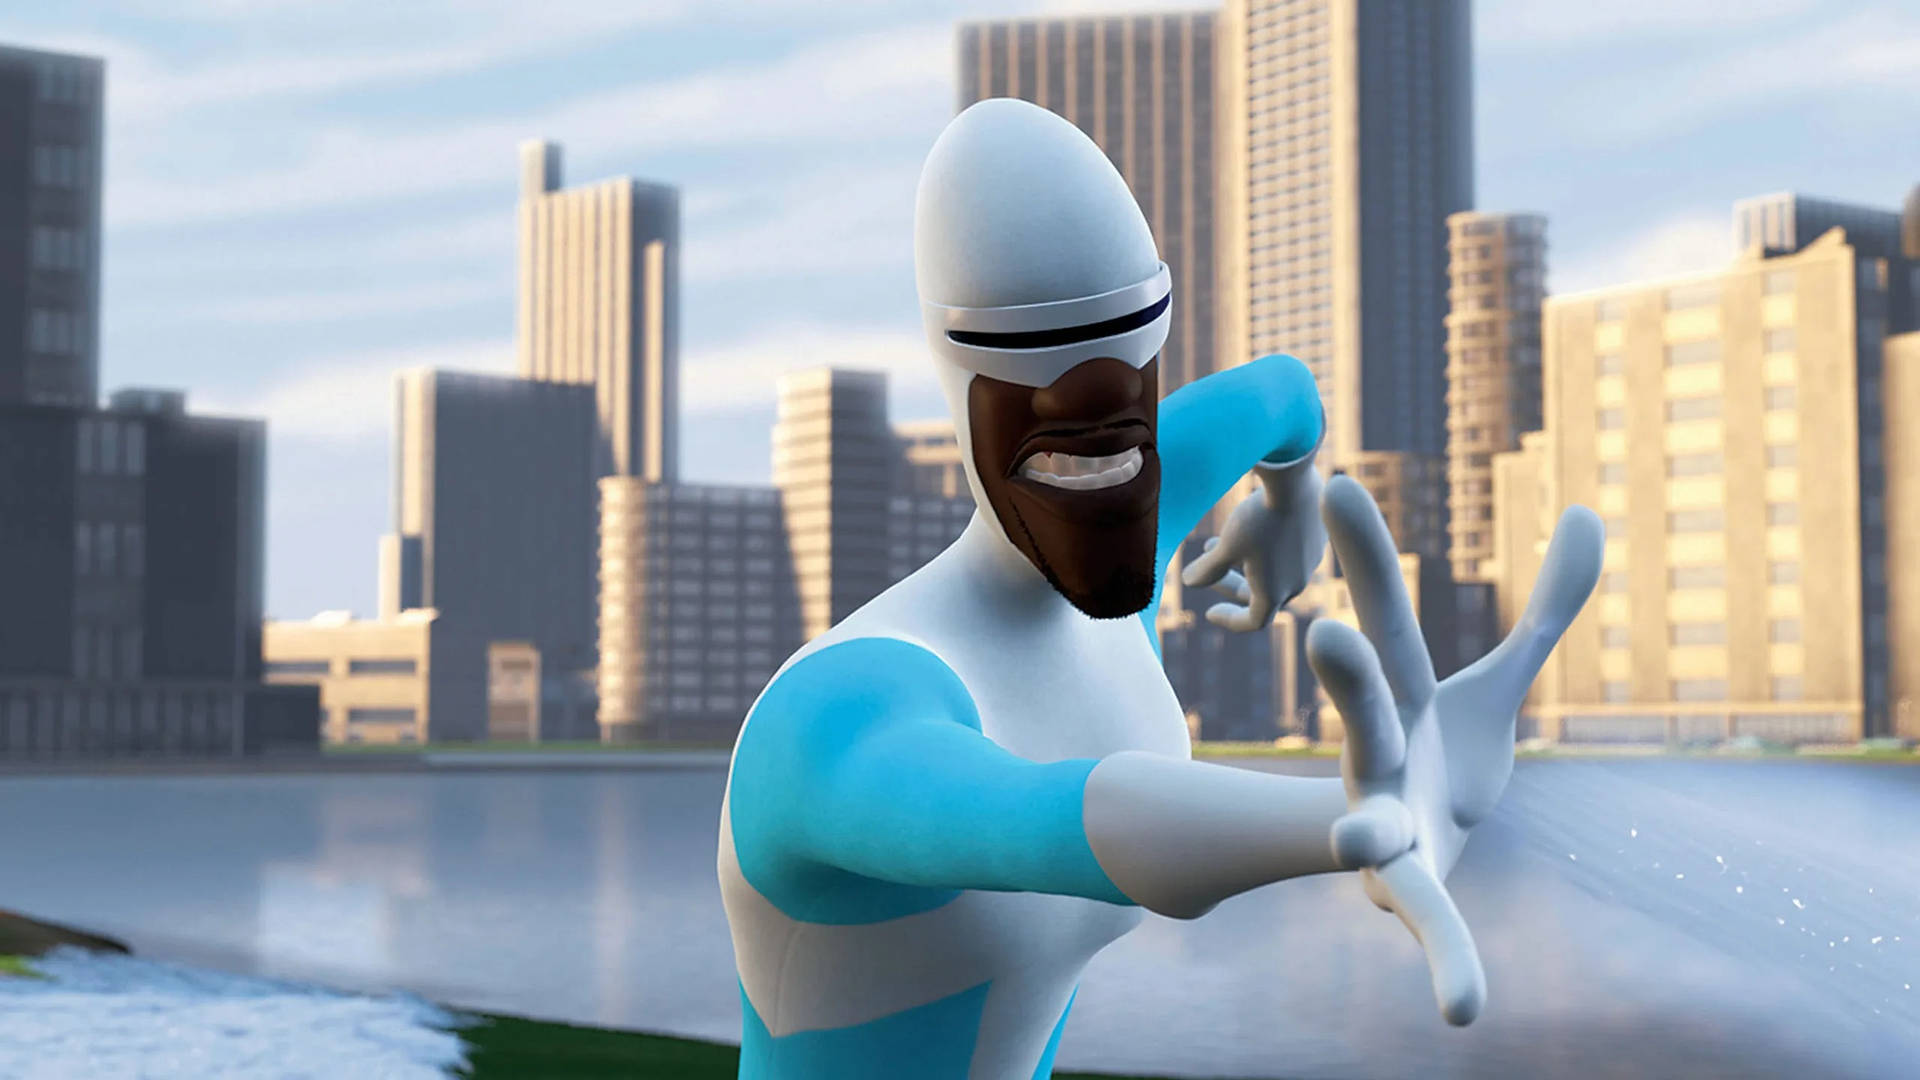 Heroic Frozone In The City Background